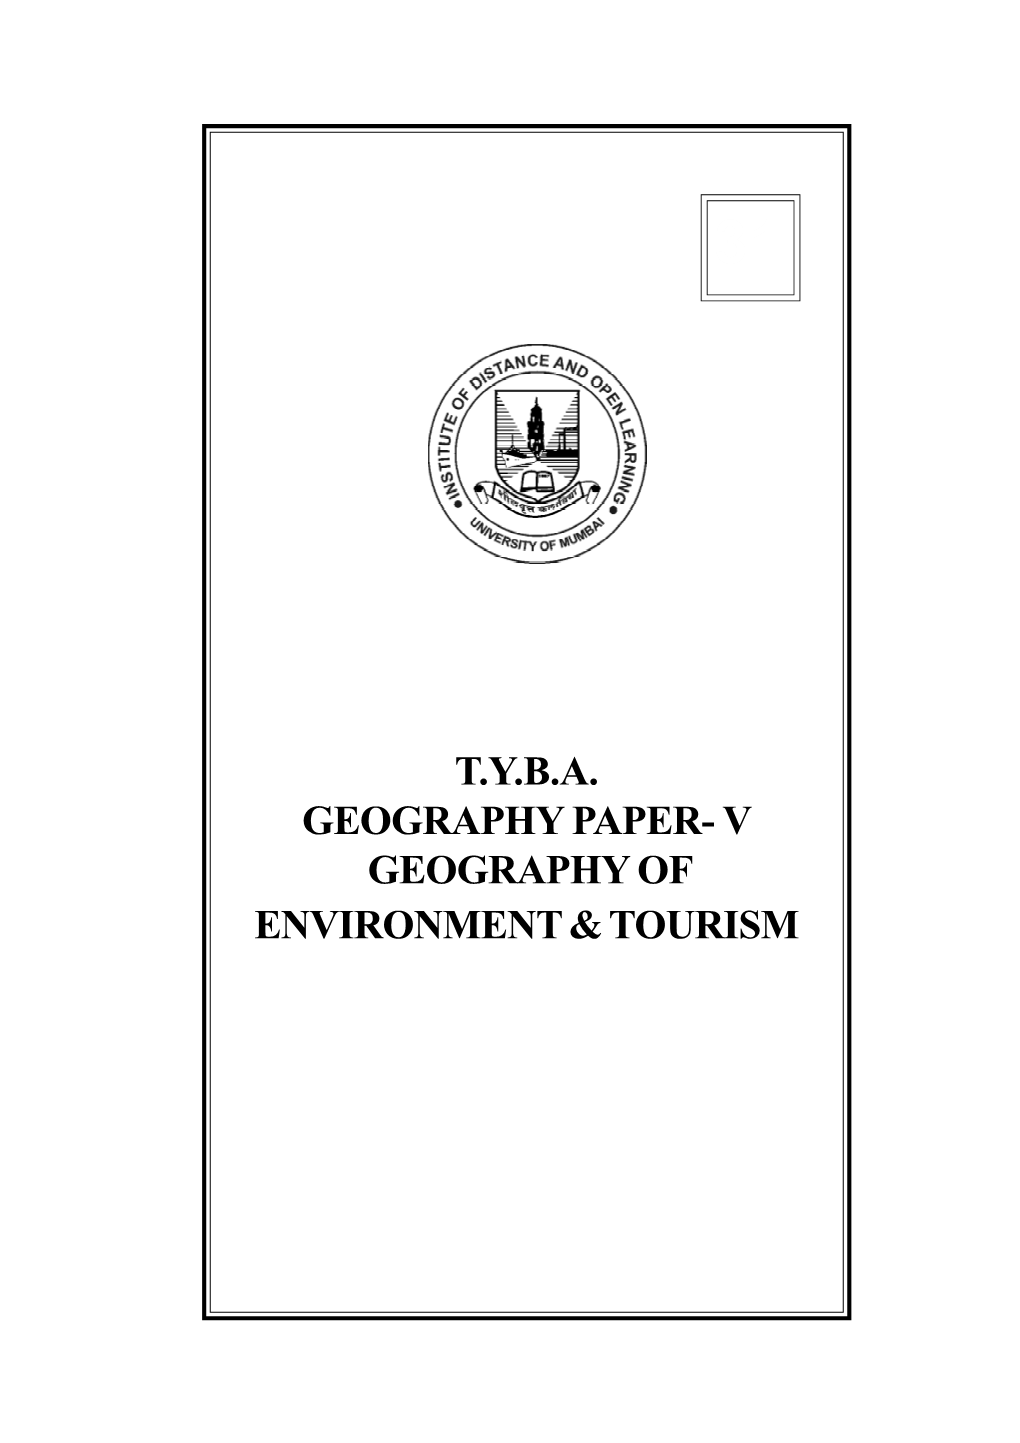 TYBA GEOGRAPHY Paper - V GEOGRAPHY of ENVIRONMENT and TOURISM